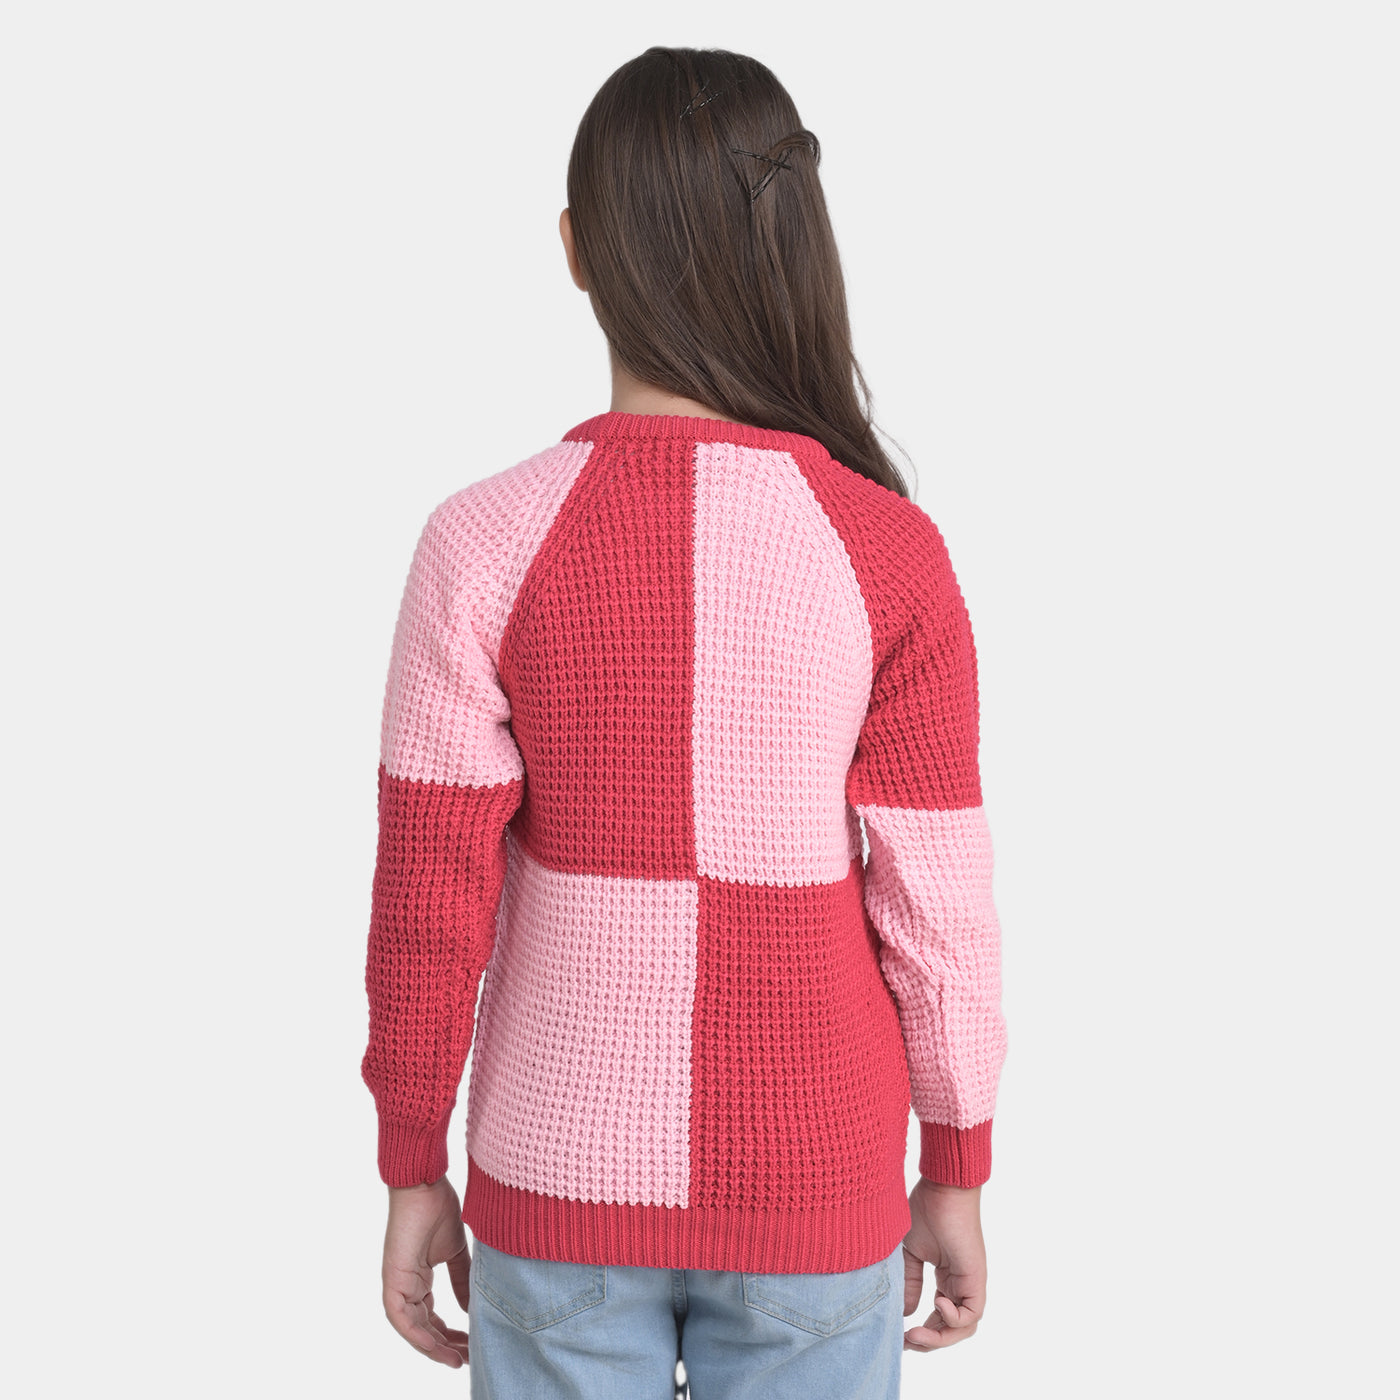 Girls Knitted Sweater -Red/Pink